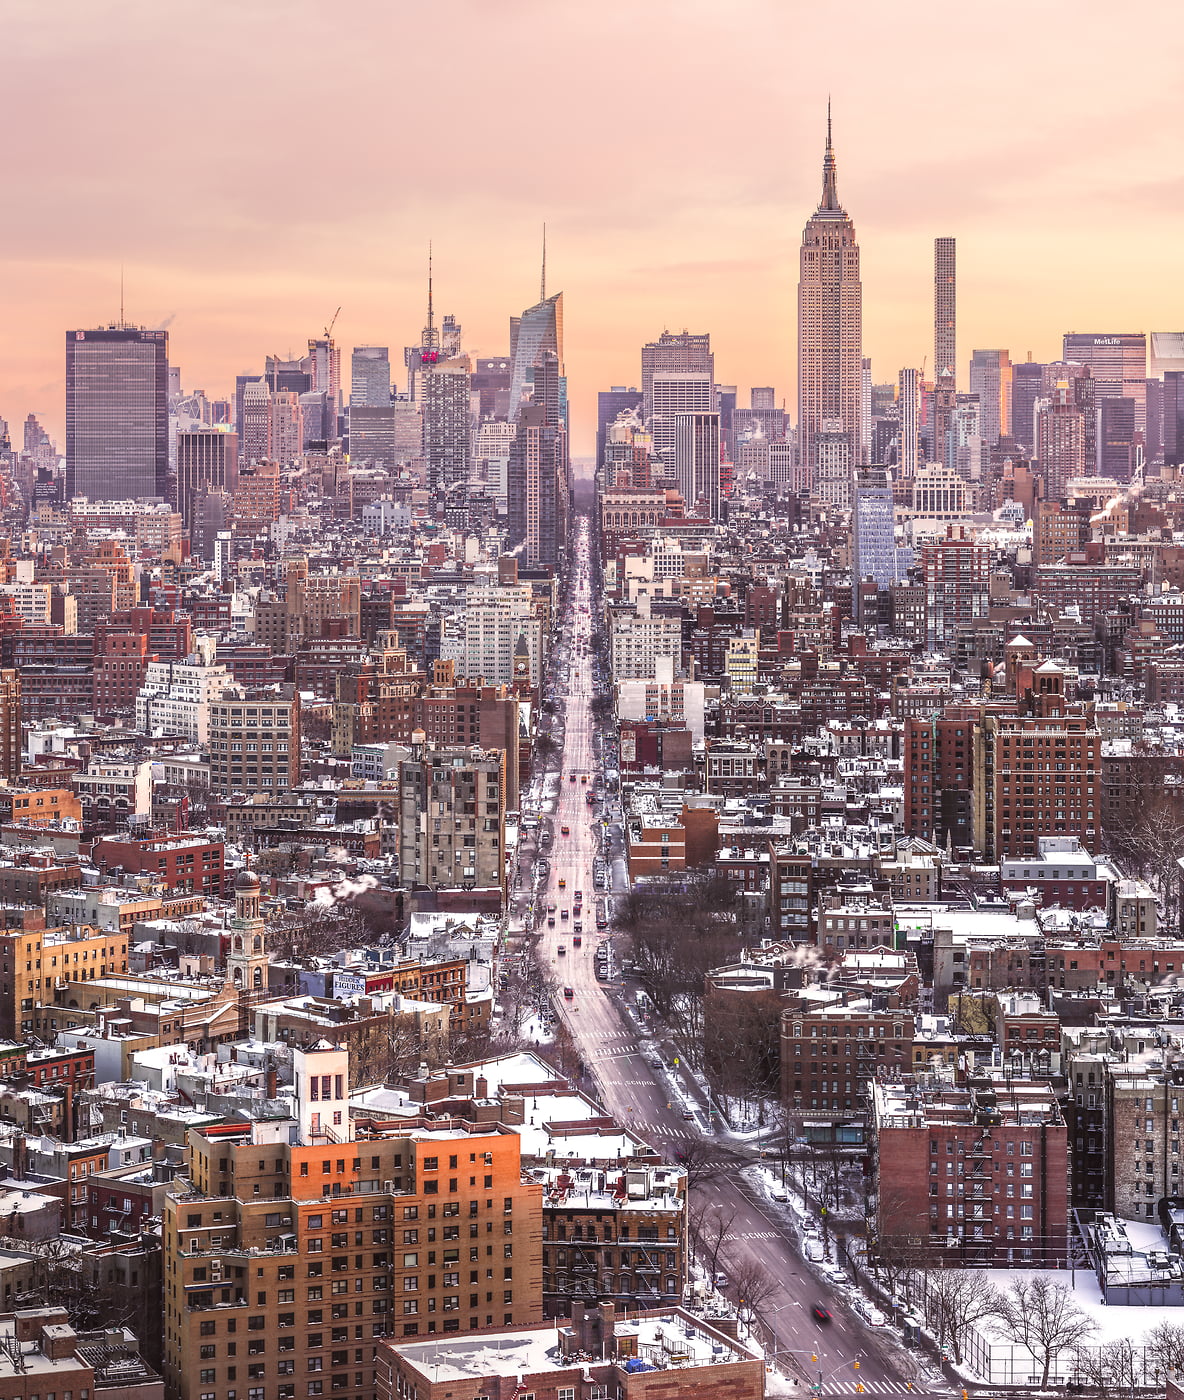 477 megapixels! A very high resolution, large-format VAST photo print of the NYC skyline in winter snow; cityscape sunrise fine art photo created by Dan Piech in New York City.